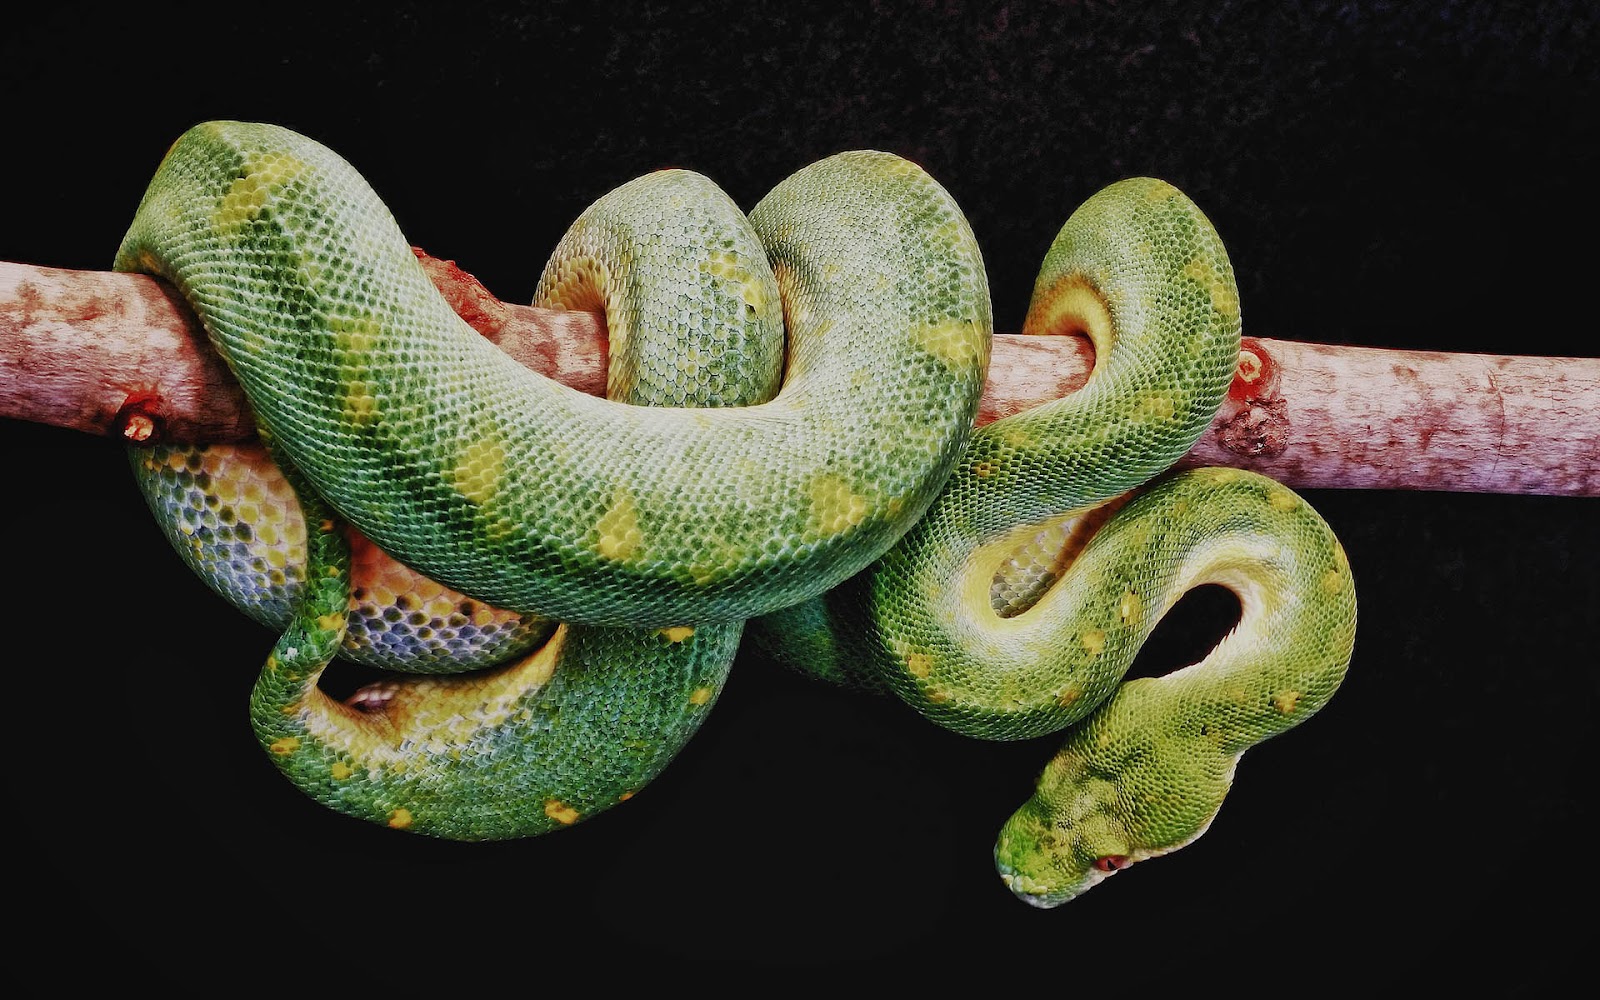 HD Snakes Wallpaper And Photos Animals